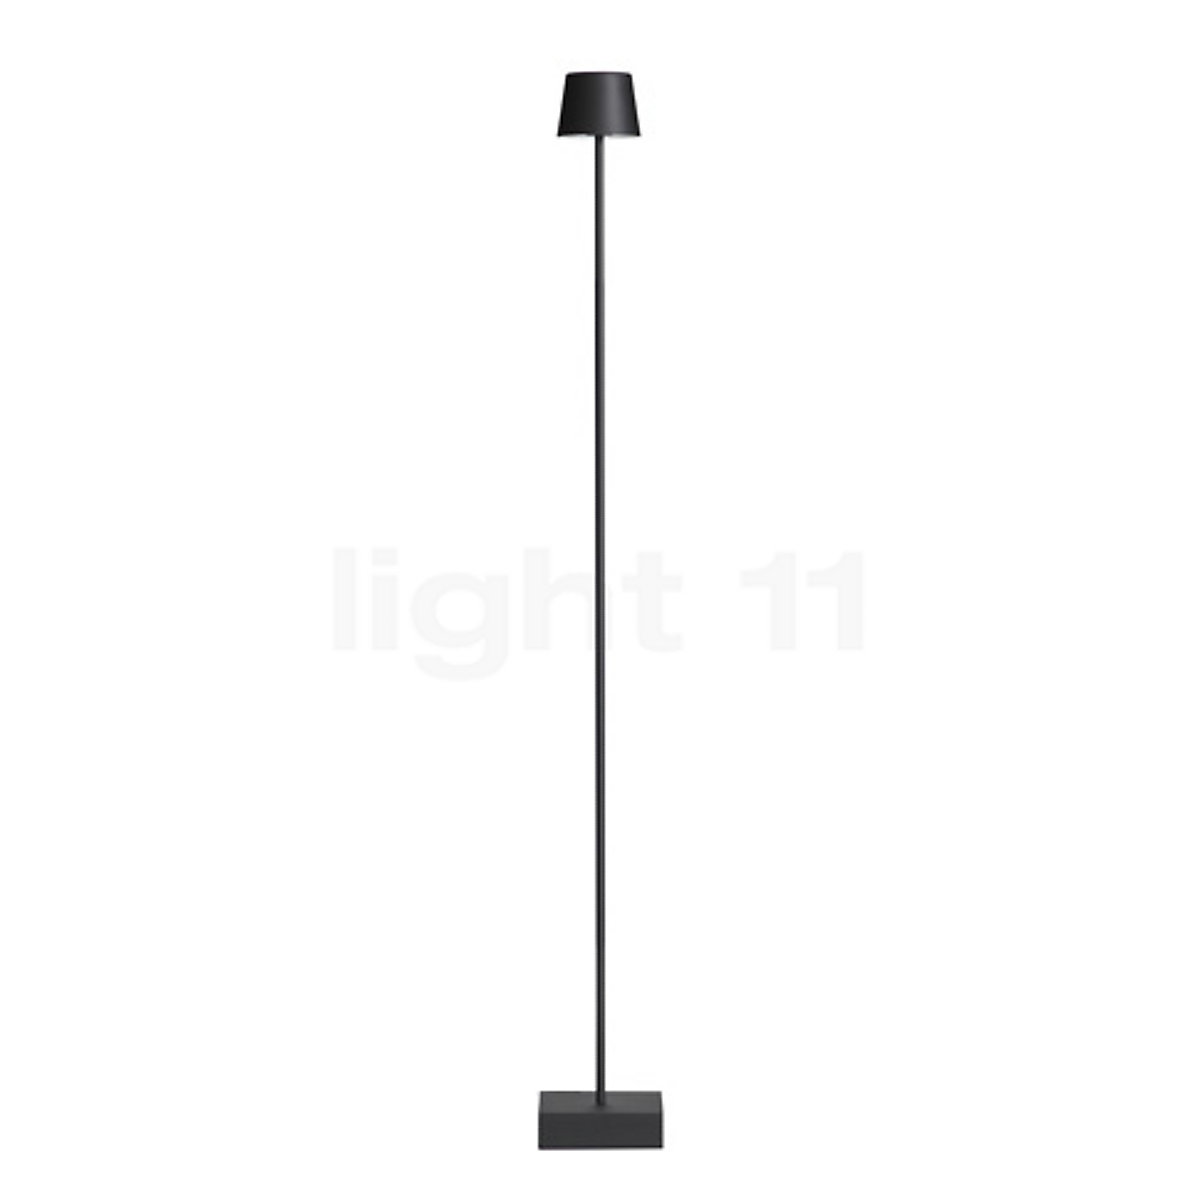 Anta Cut Floor Lamp With Cord Dimmer, Floor Lamps Without Cords